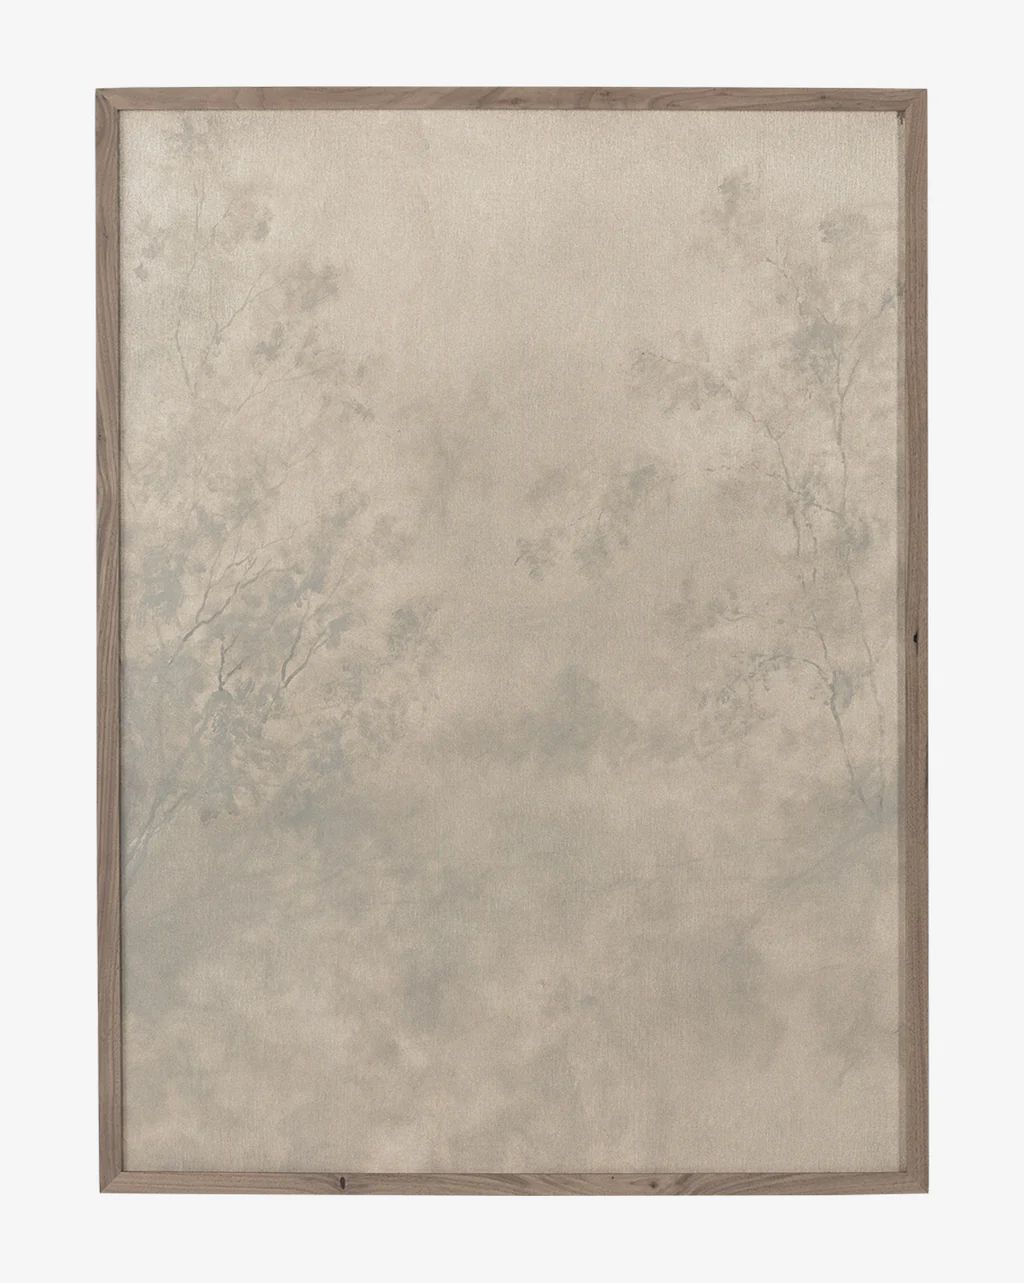 Gray Smudged Tree Painting | McGee & Co.